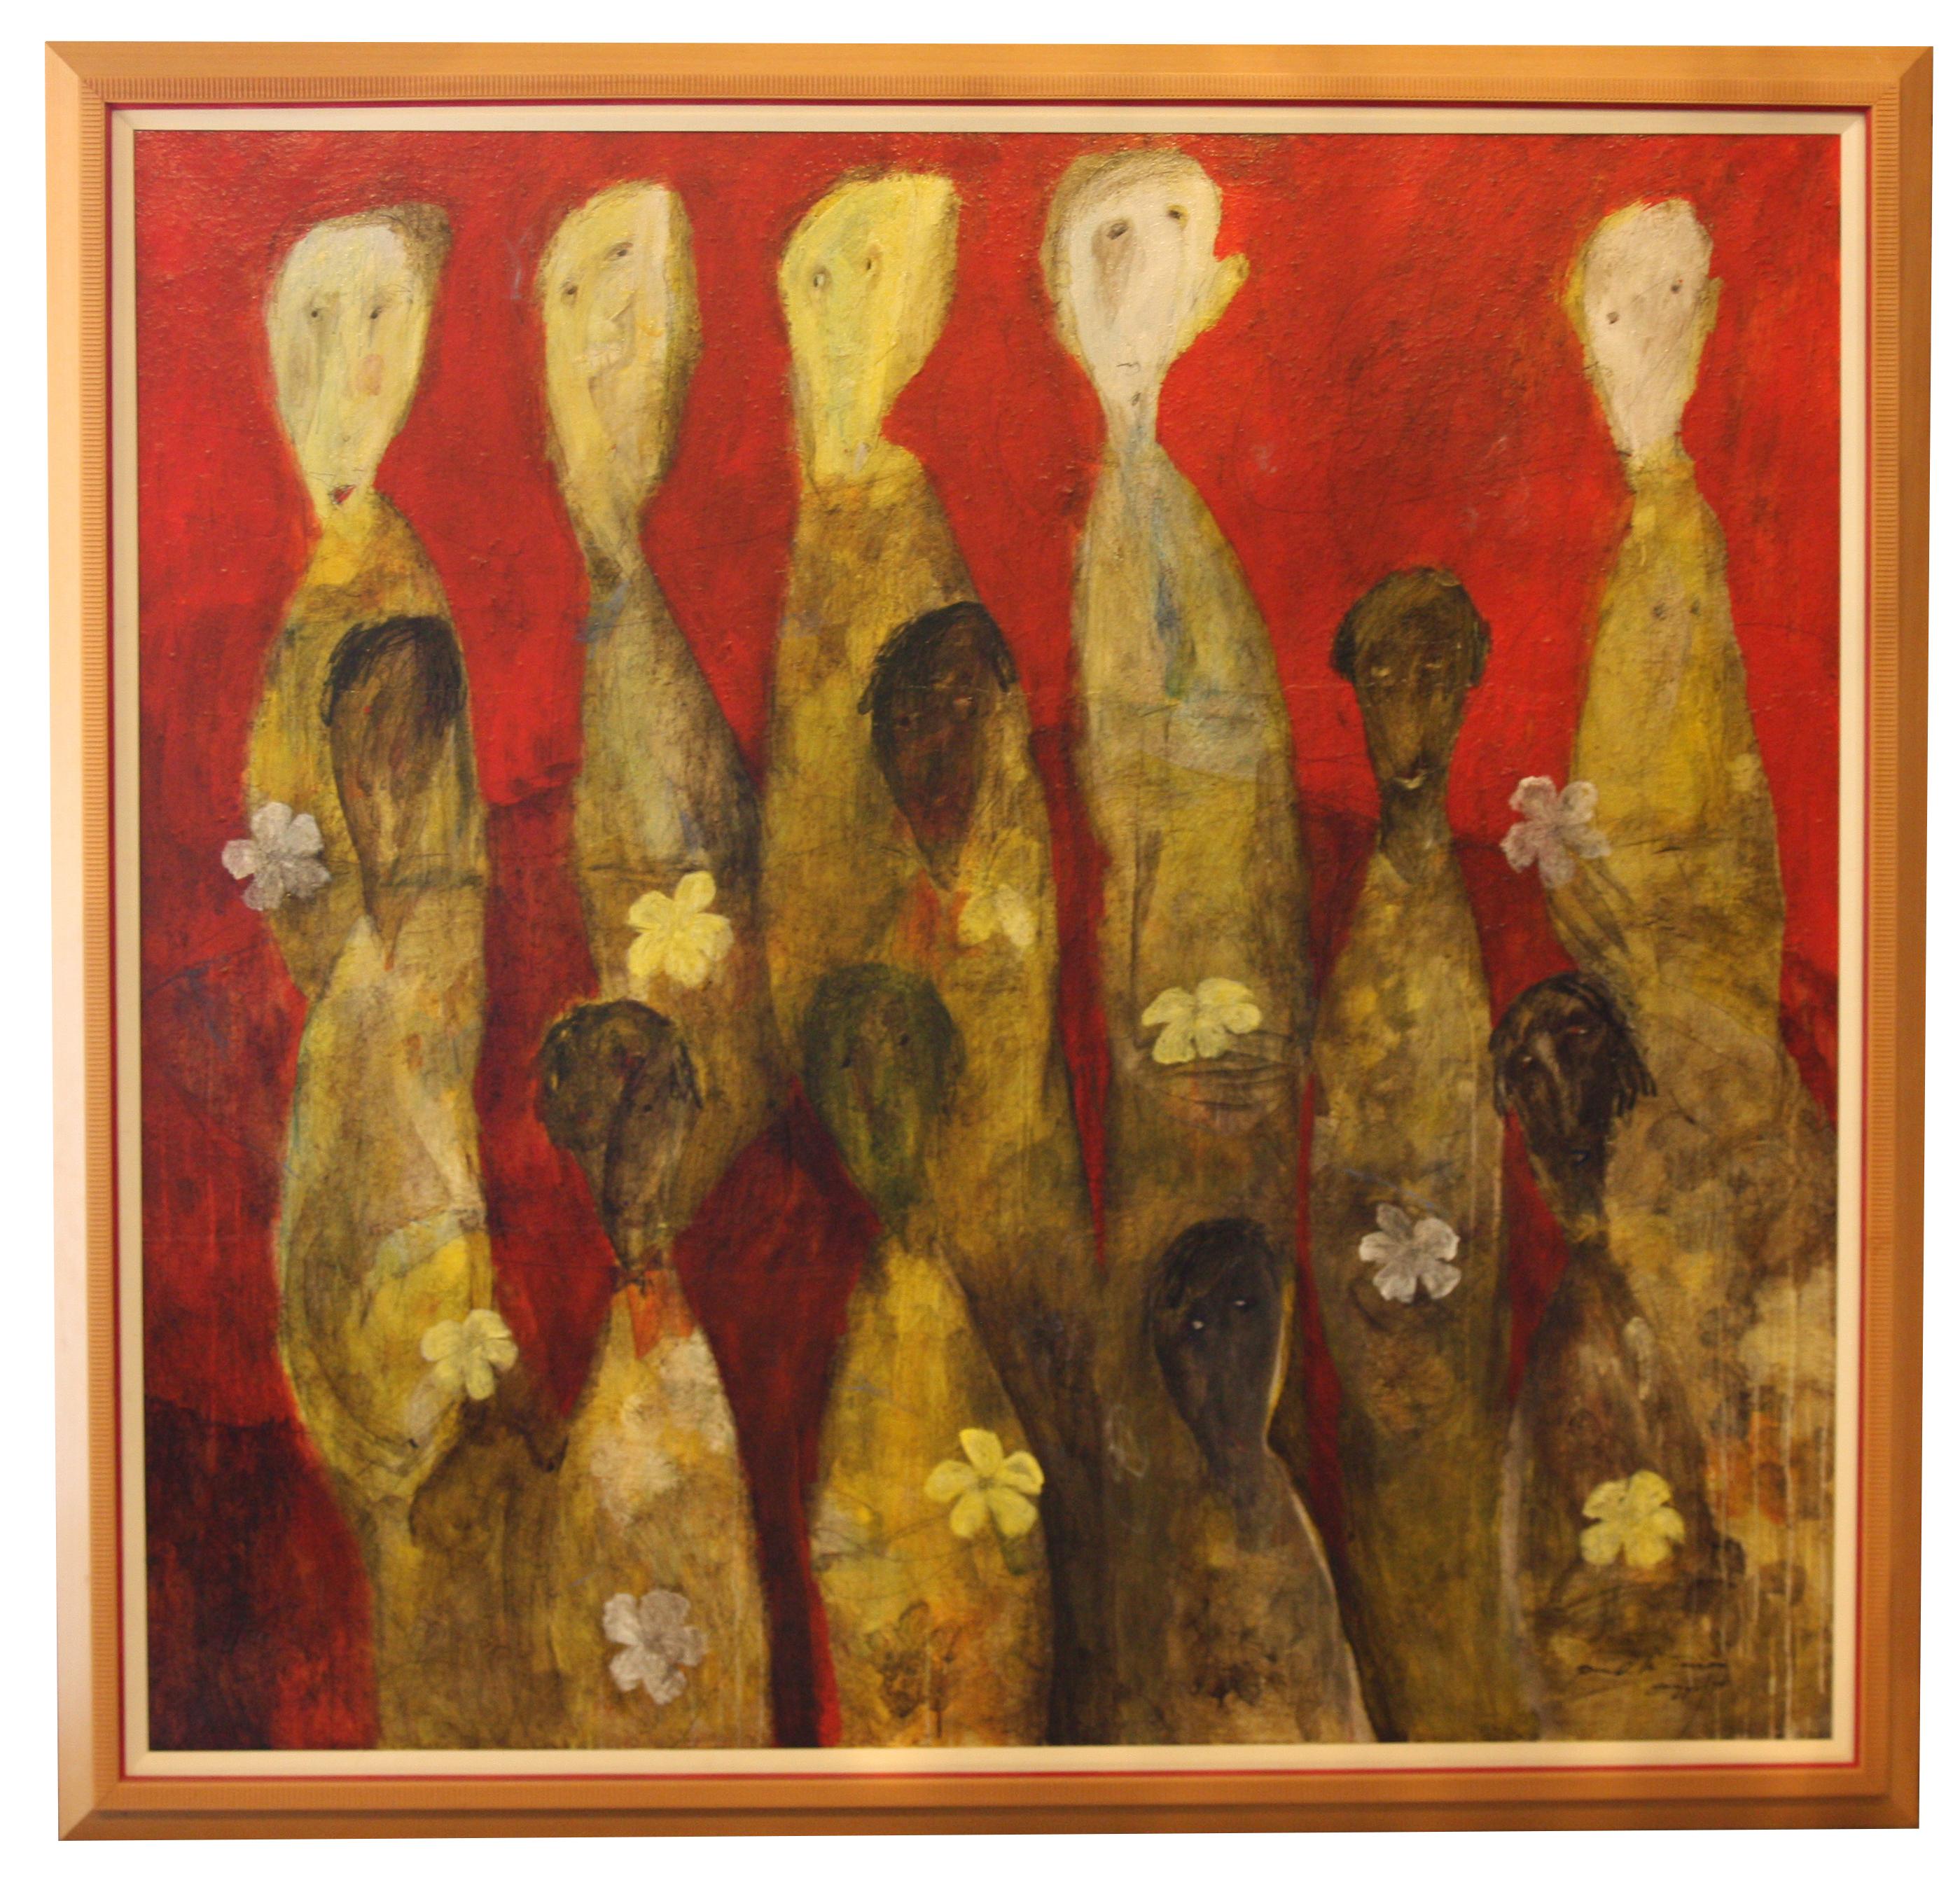 Unknown Figurative Painting - Large Framed Oil Painting of Figures with Flowers on Red Background